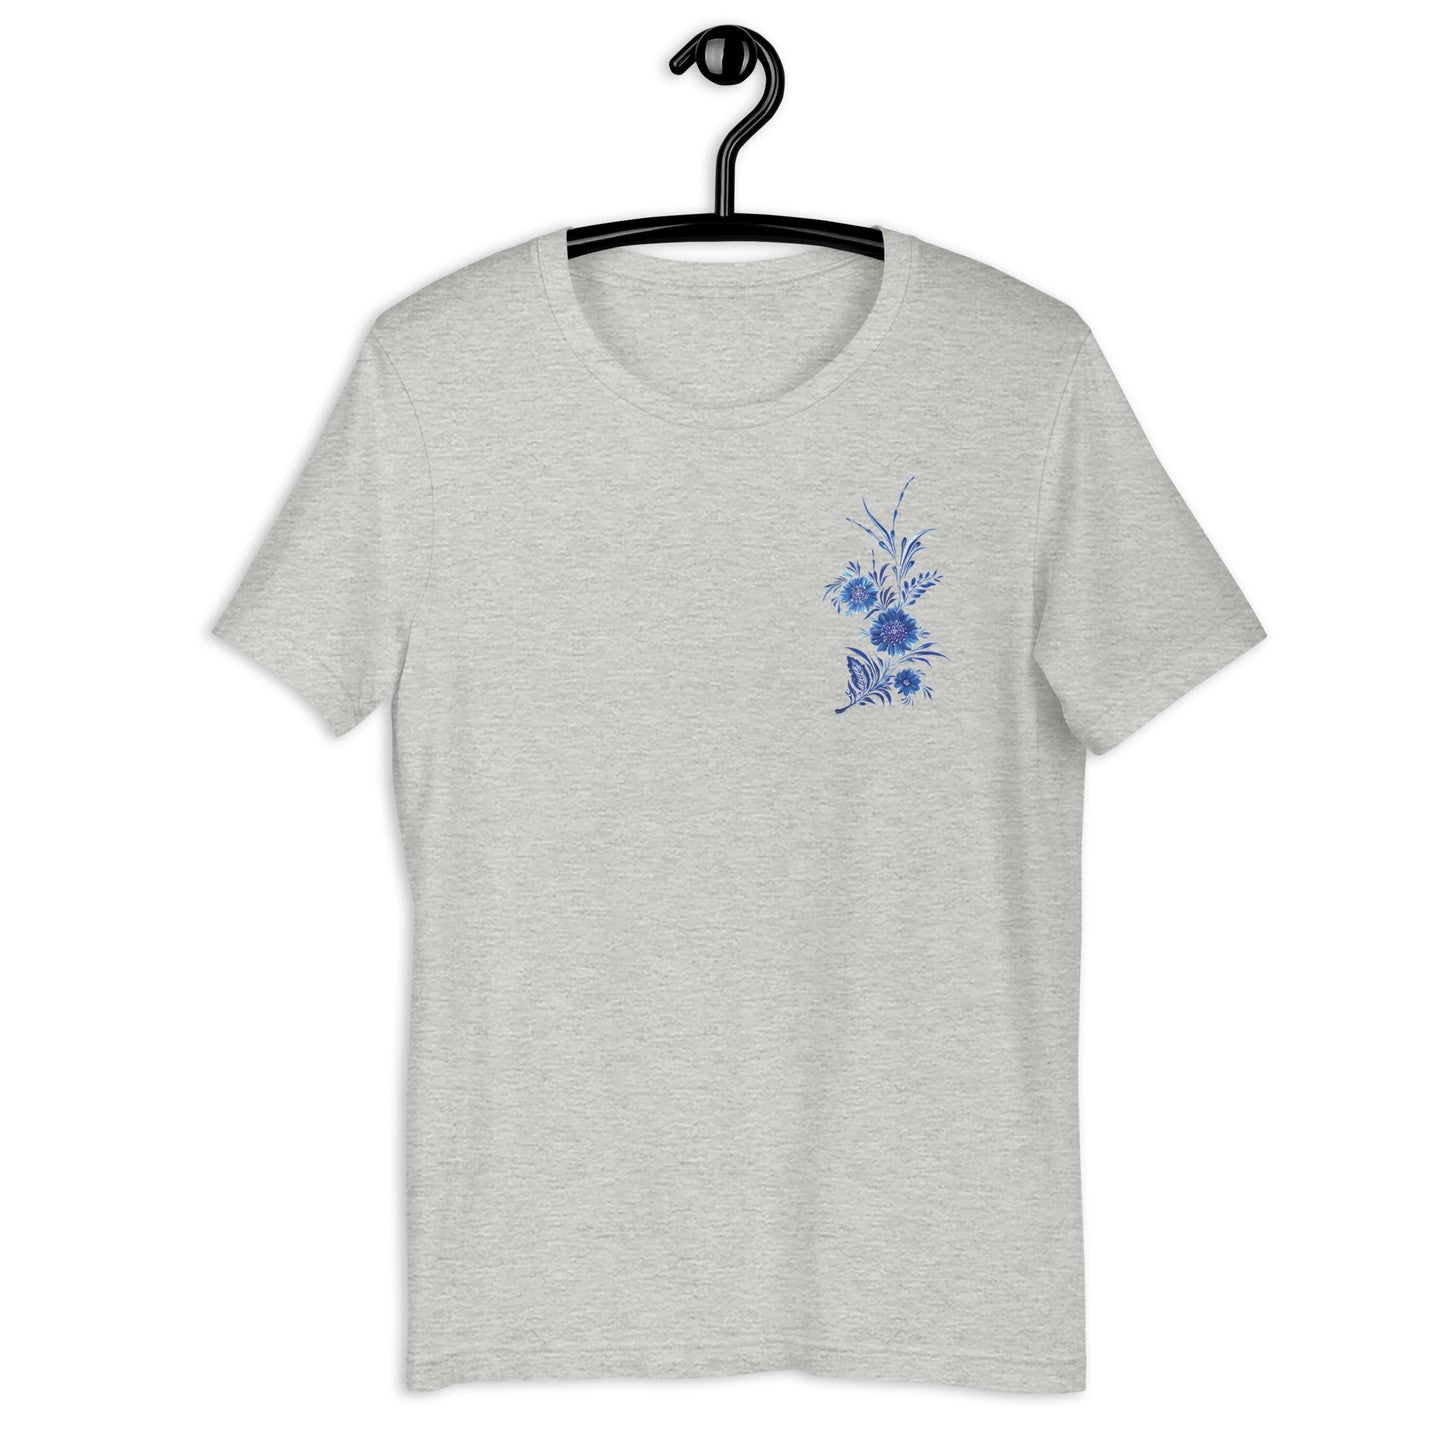 T-shirt with a blue flower